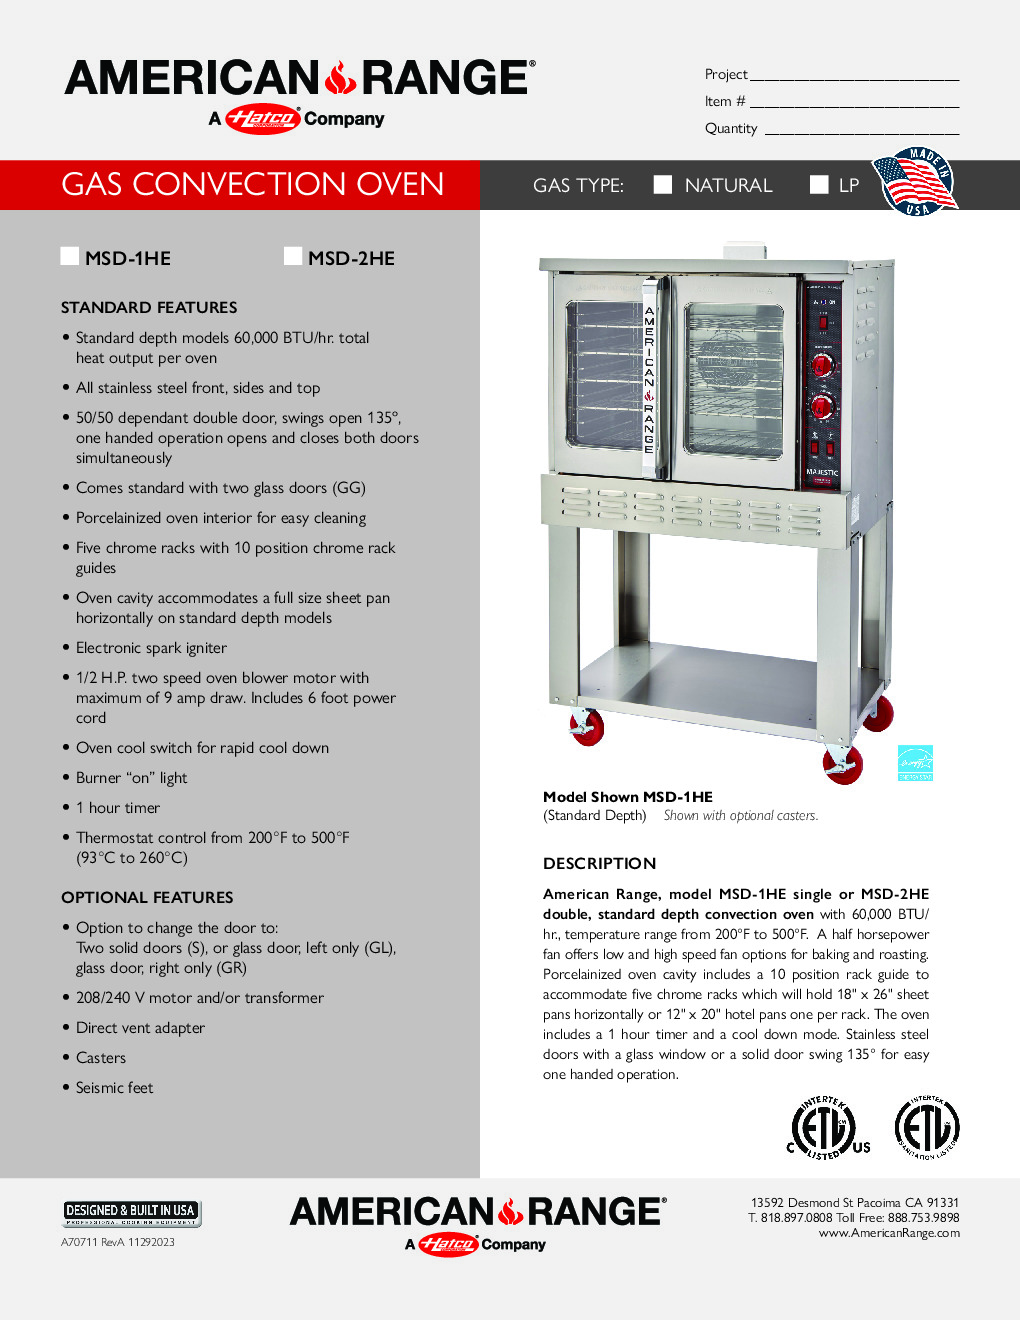 American Range MSD-2HE Gas Convection Oven